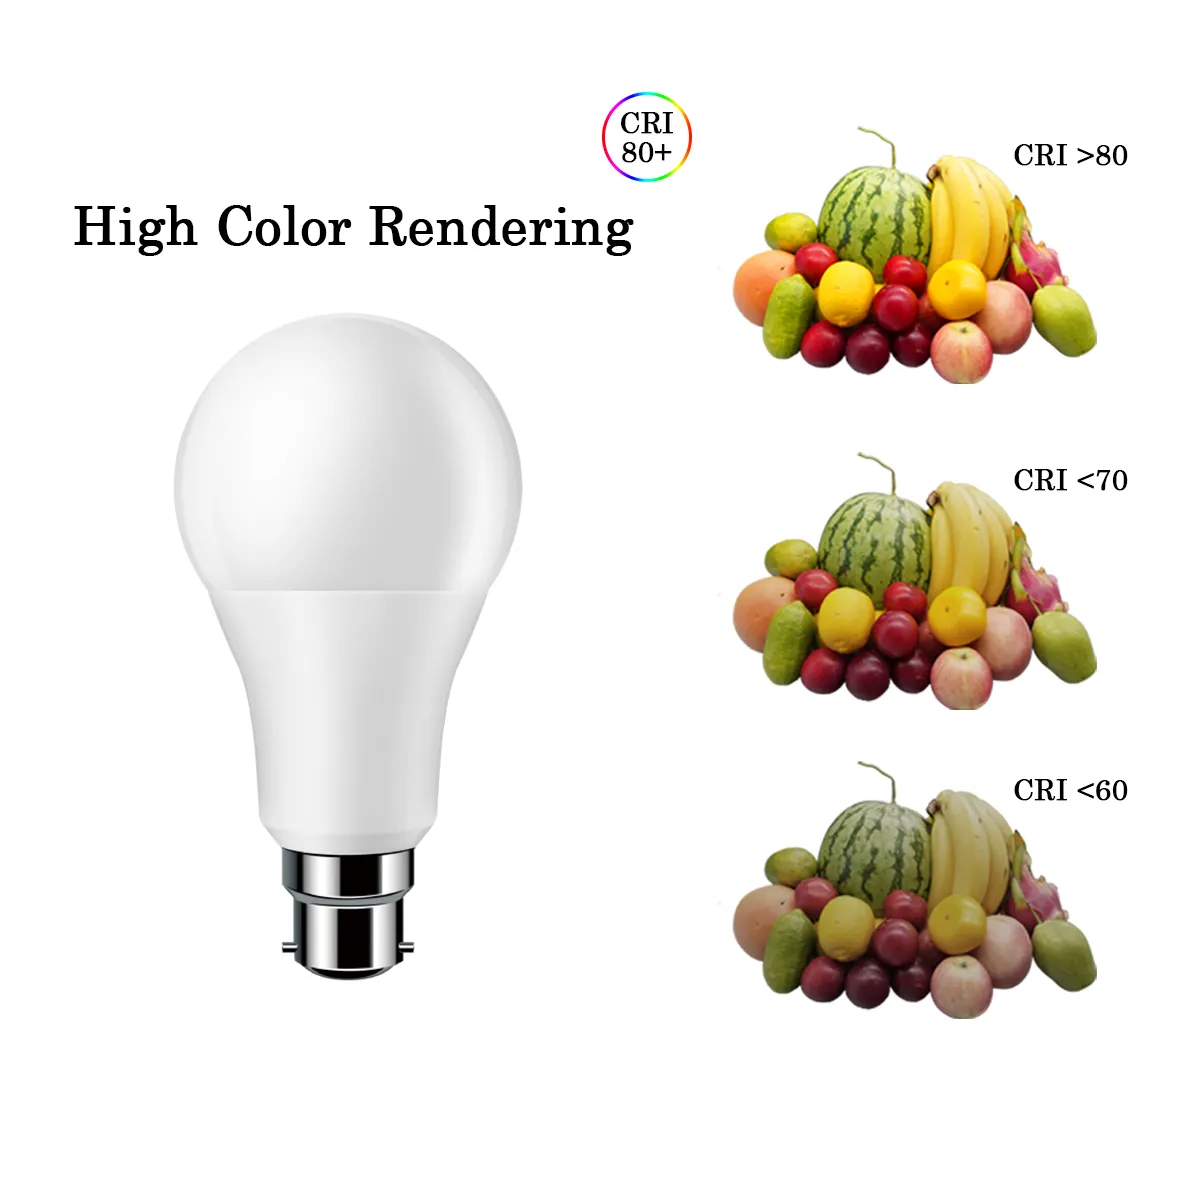 LED High Lumen A60 E27/B22 15W 220V 3000K 4000K 6000K Light No Flicker Bulb Wholesale for Home Bedroom